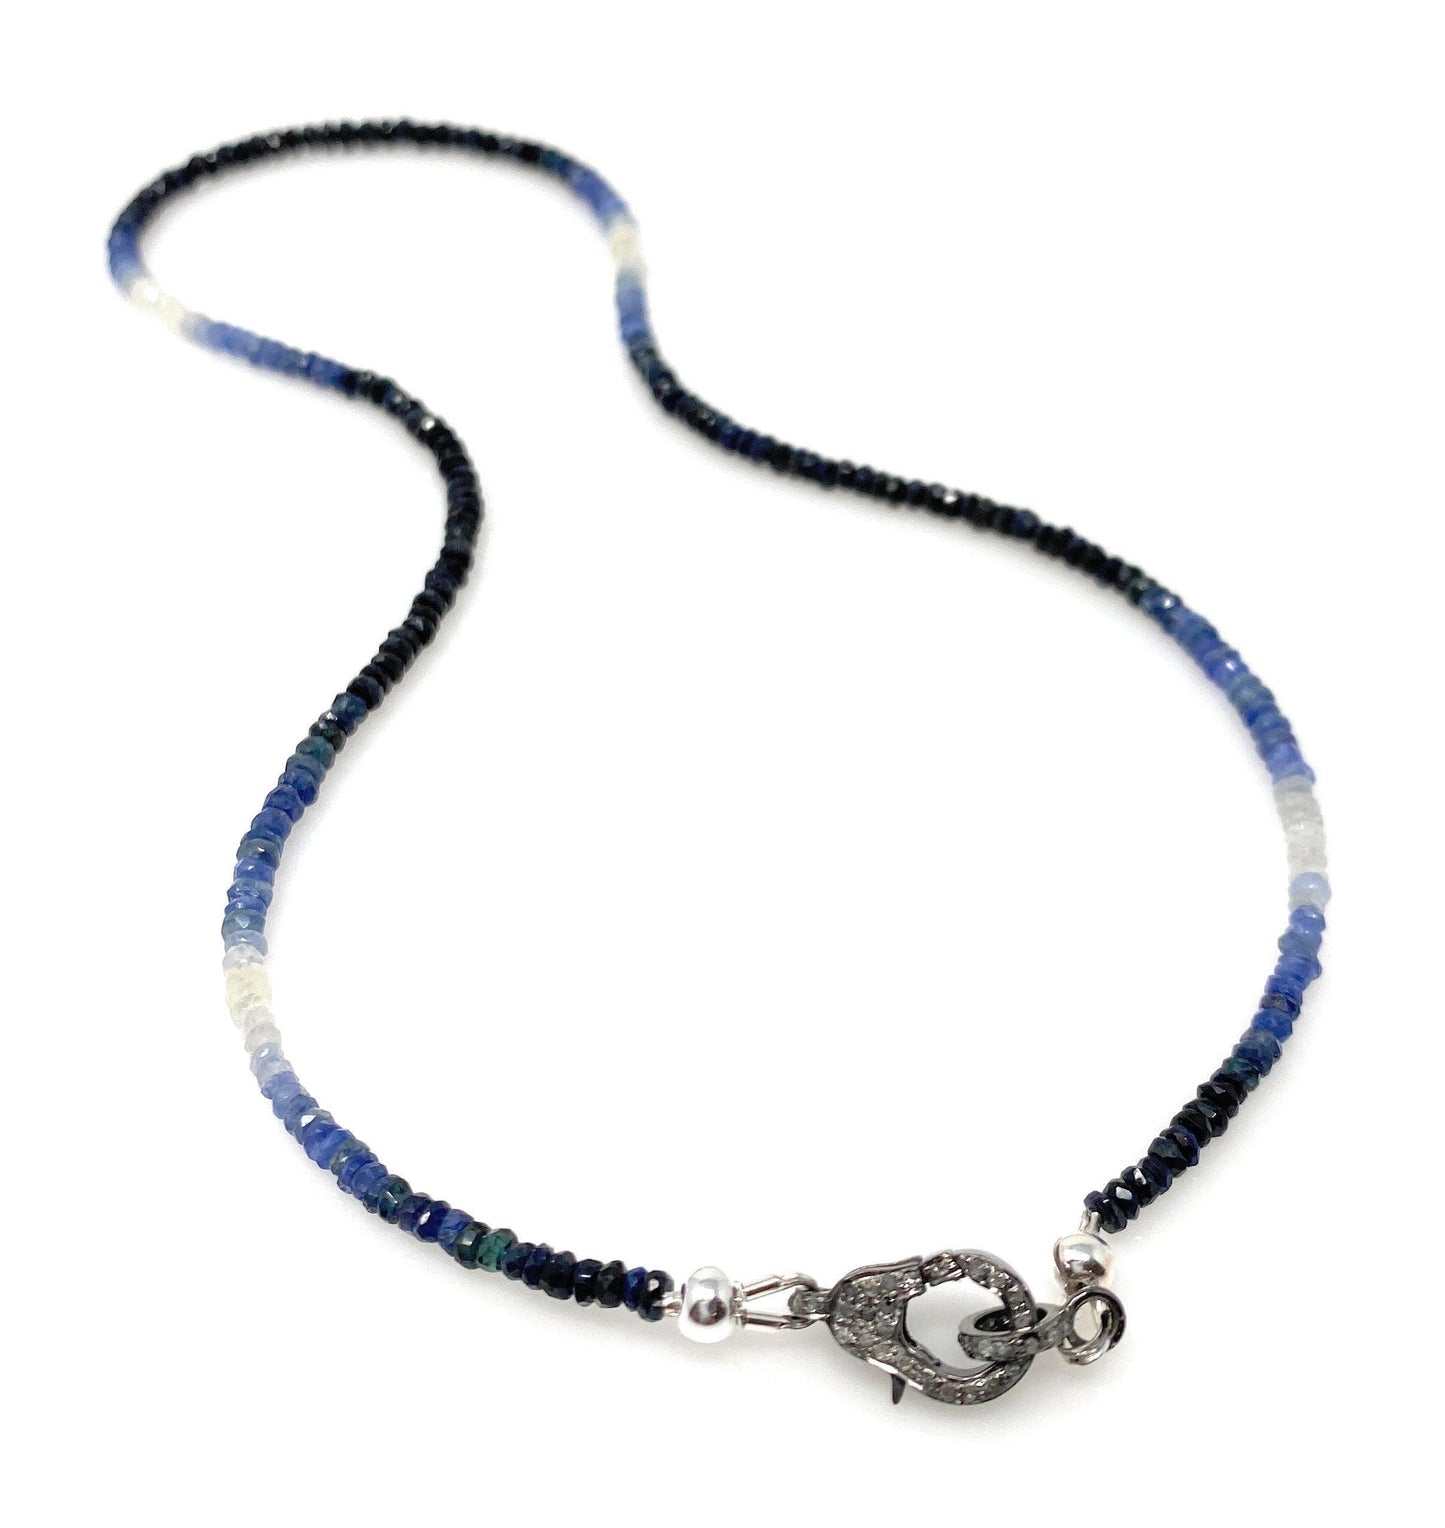 17.5” Genuine Shaded Blue Sapphire Necklace with Pave Diamond Clasp,